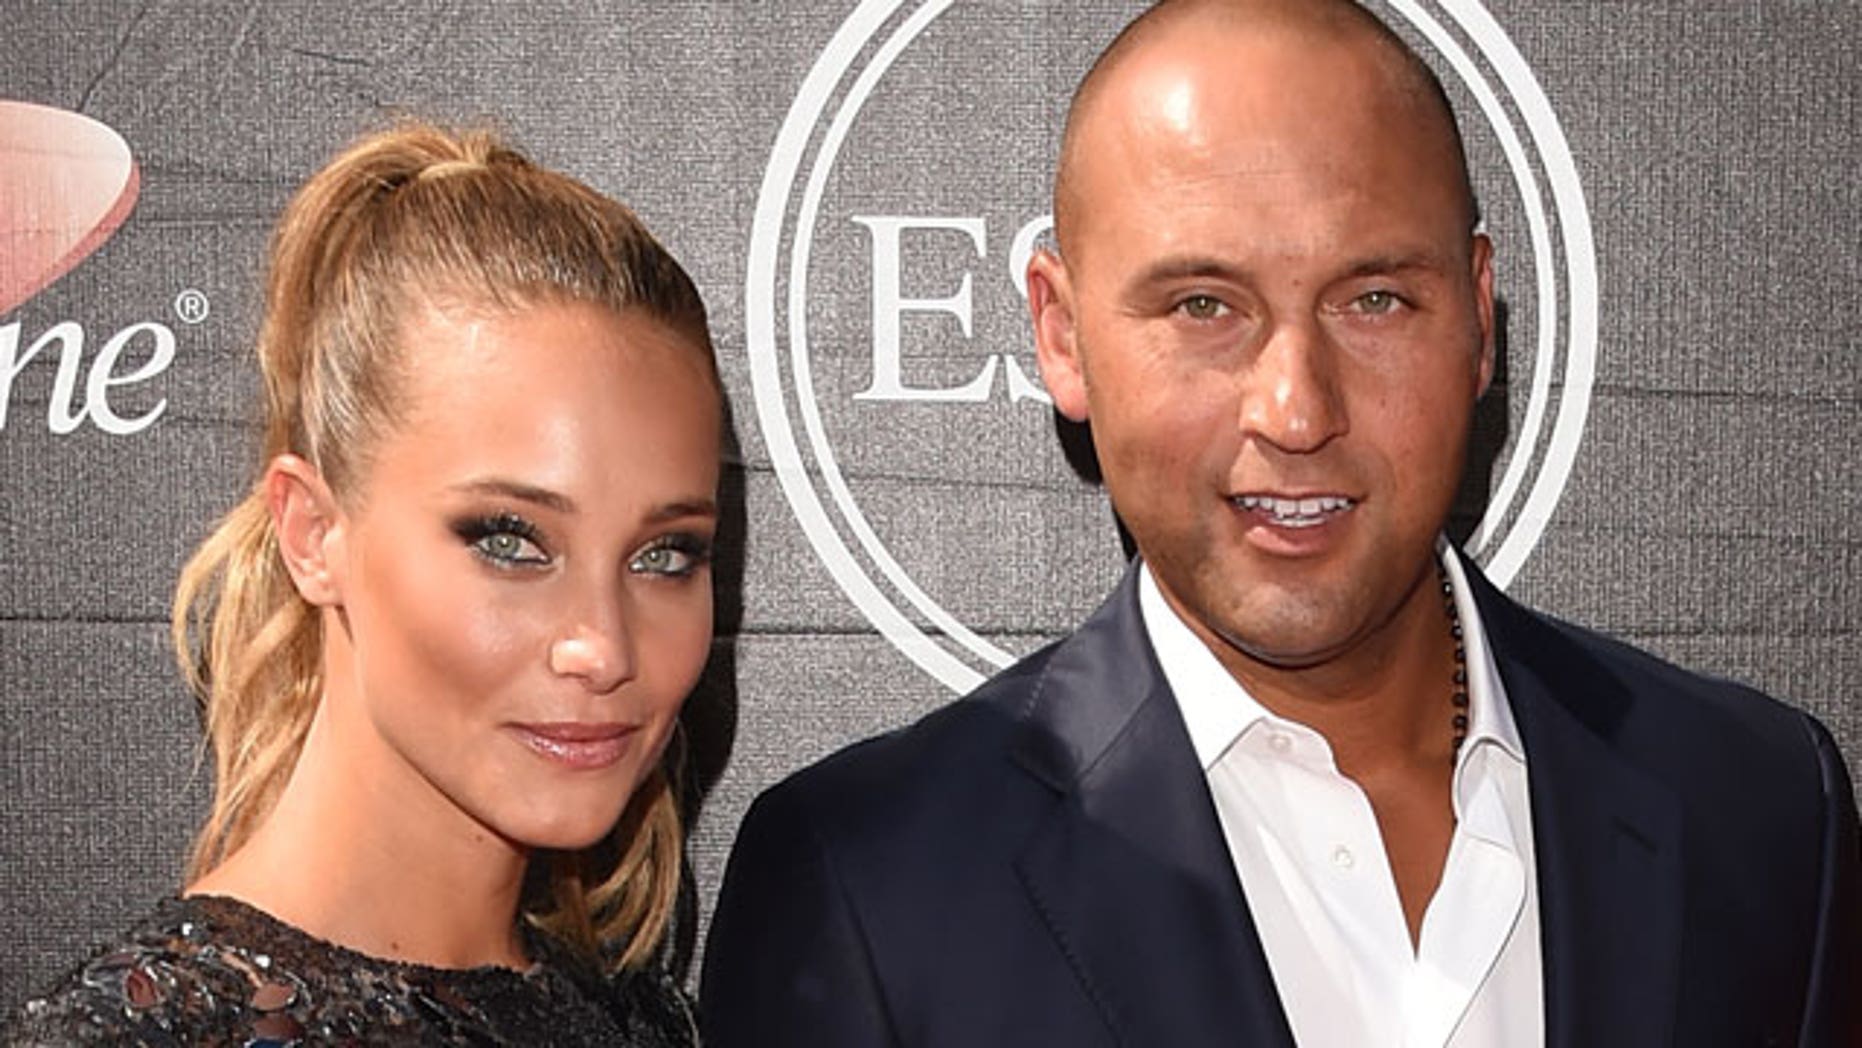 Derek Jeter's wife Hannah Davis shows off baby bump while out with her husband | Fox News1862 x 1048